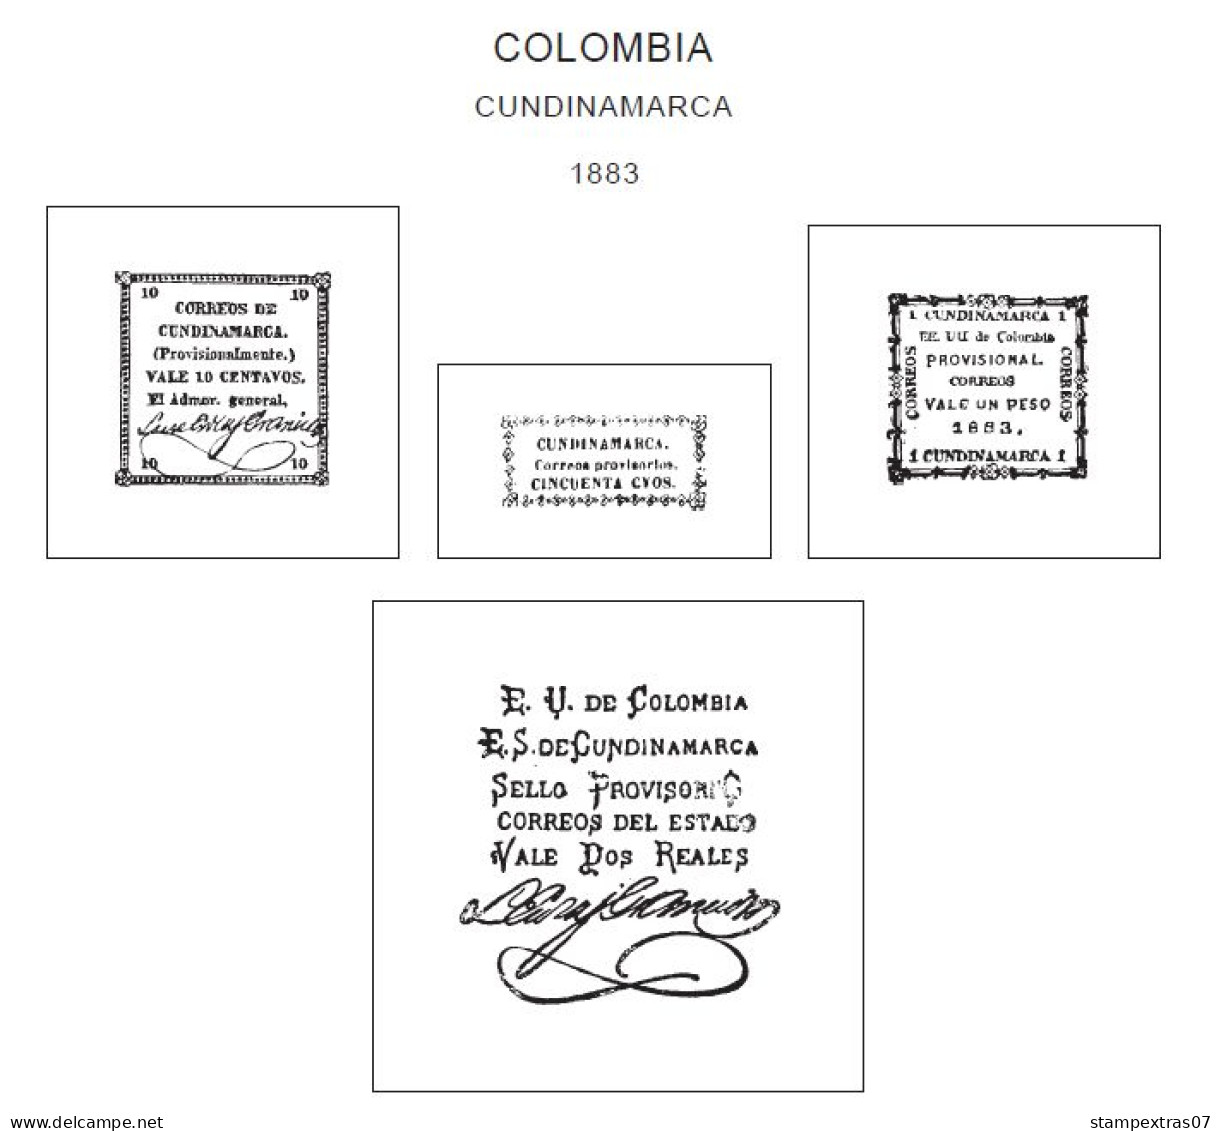 COLOMBIA STAMP ALBUM PAGES 1859-2011 (353 Pages) - English